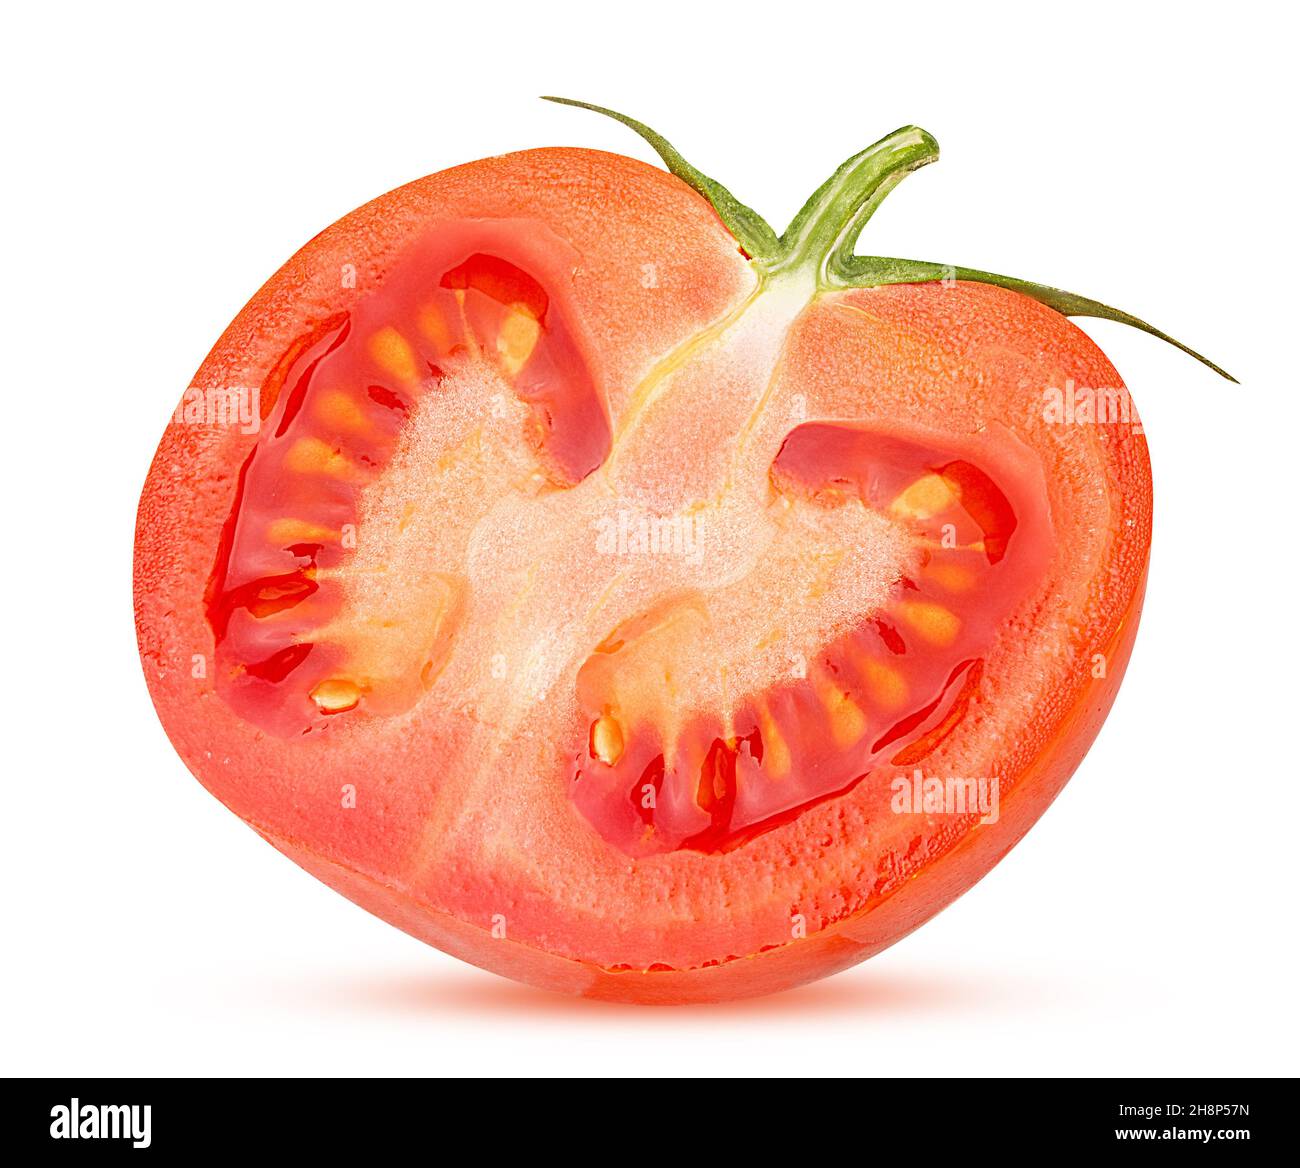 Fresh red tomato cut in half with green leaves isolated on white background Clipping Path. Full depth of field. Stock Photo